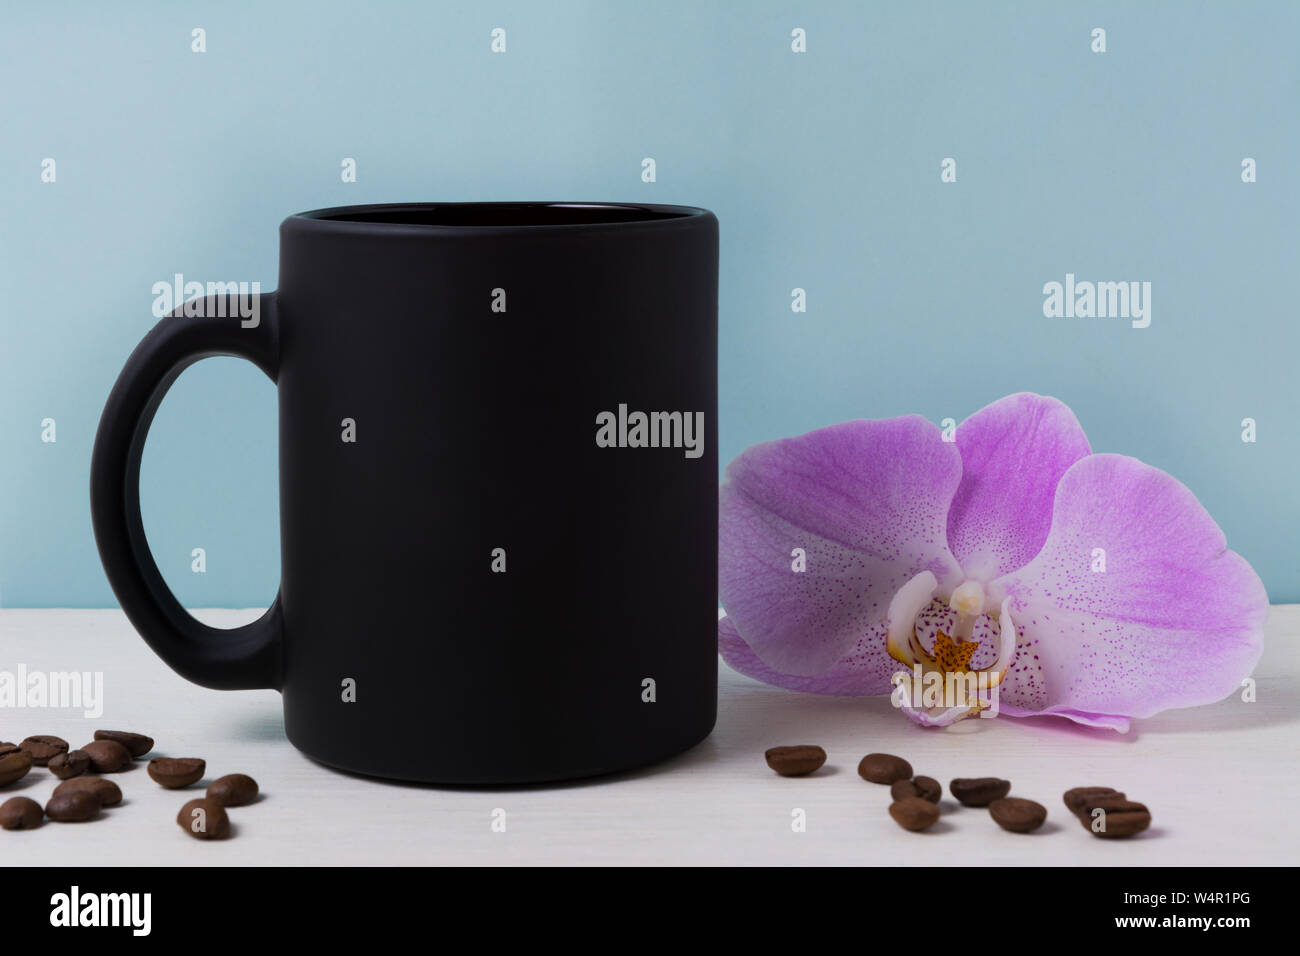 Black coffee mug mockup with purple orchid and coffee beans. Empty mug mock up for brand promotion. Stock Photo